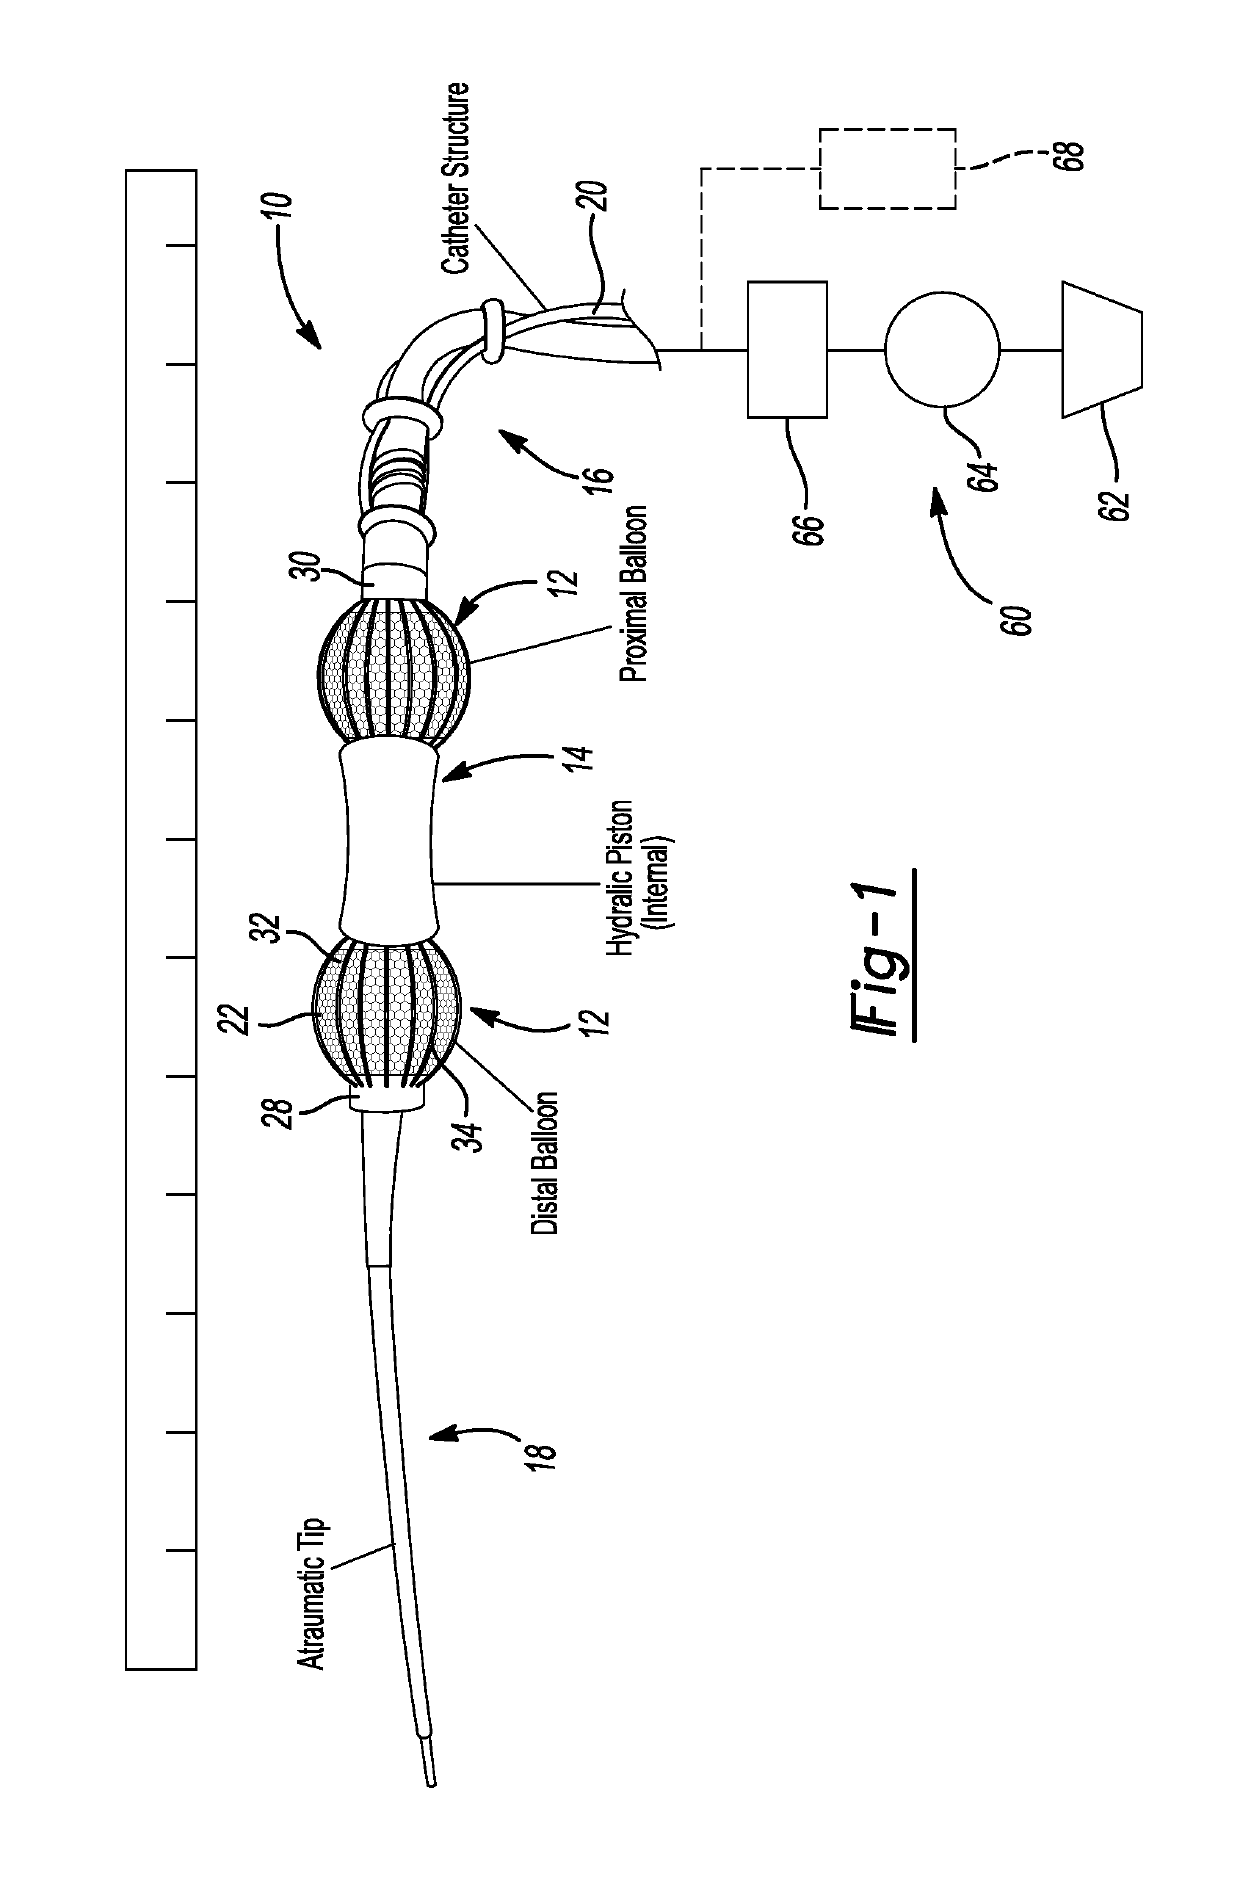 Mechanotransductive bowel extender device having local delivery of medically relevant liquids